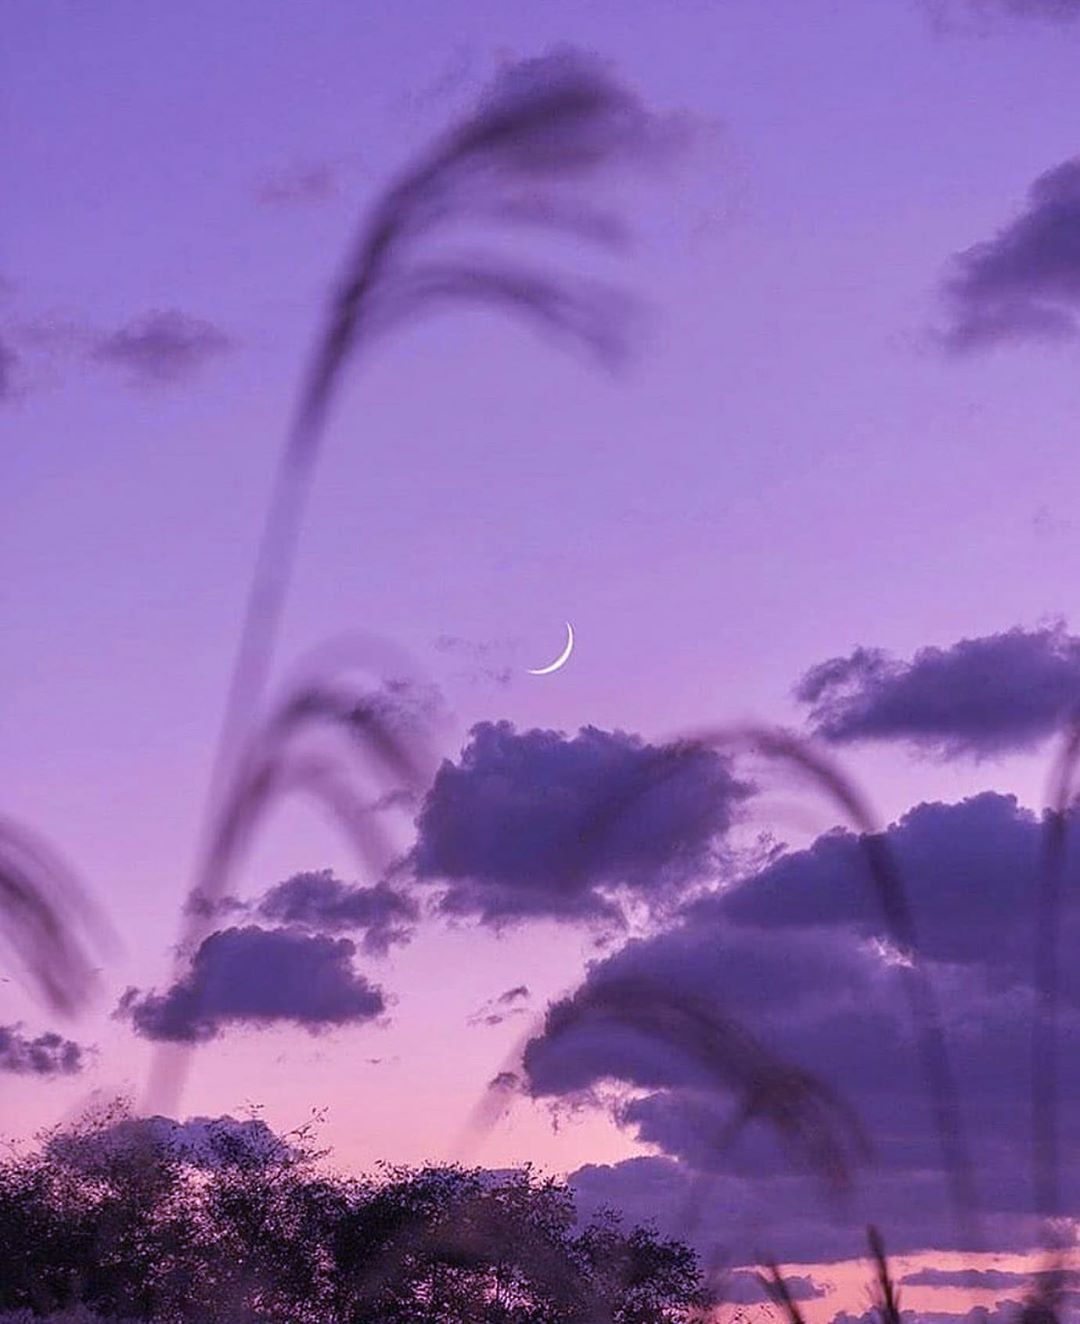 Photo by lofi aesthetics. ✨ in Paradise Vibe. Image may contain: sky, cloud, outdoor and nature. Asthetic sky, Aesthetic sky, Purple aesthetic